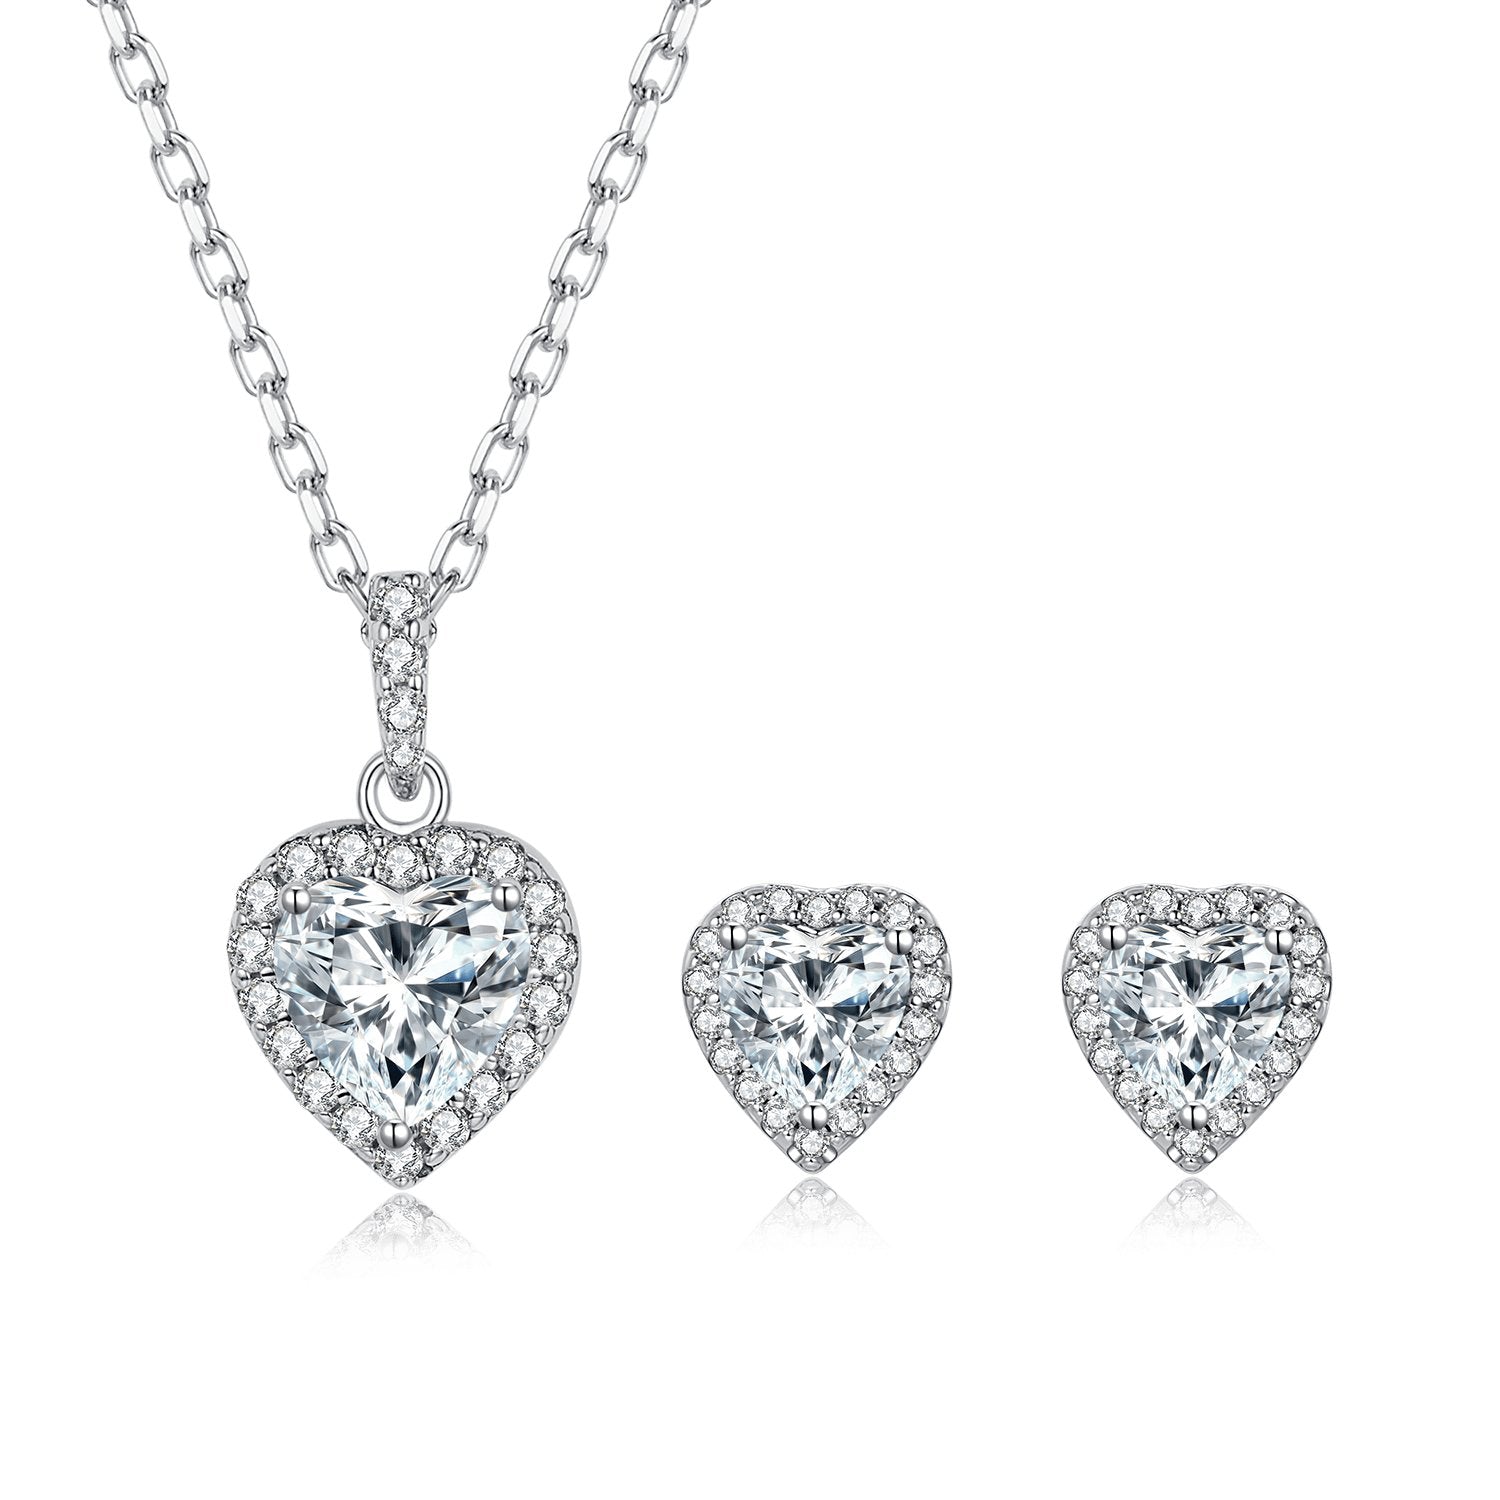 Romantic Pink Heart High Carbon Diamond S925 Silver Jewelry Set Pendant  Necklace Earrings For Women Luxury Valentine's Day Gift